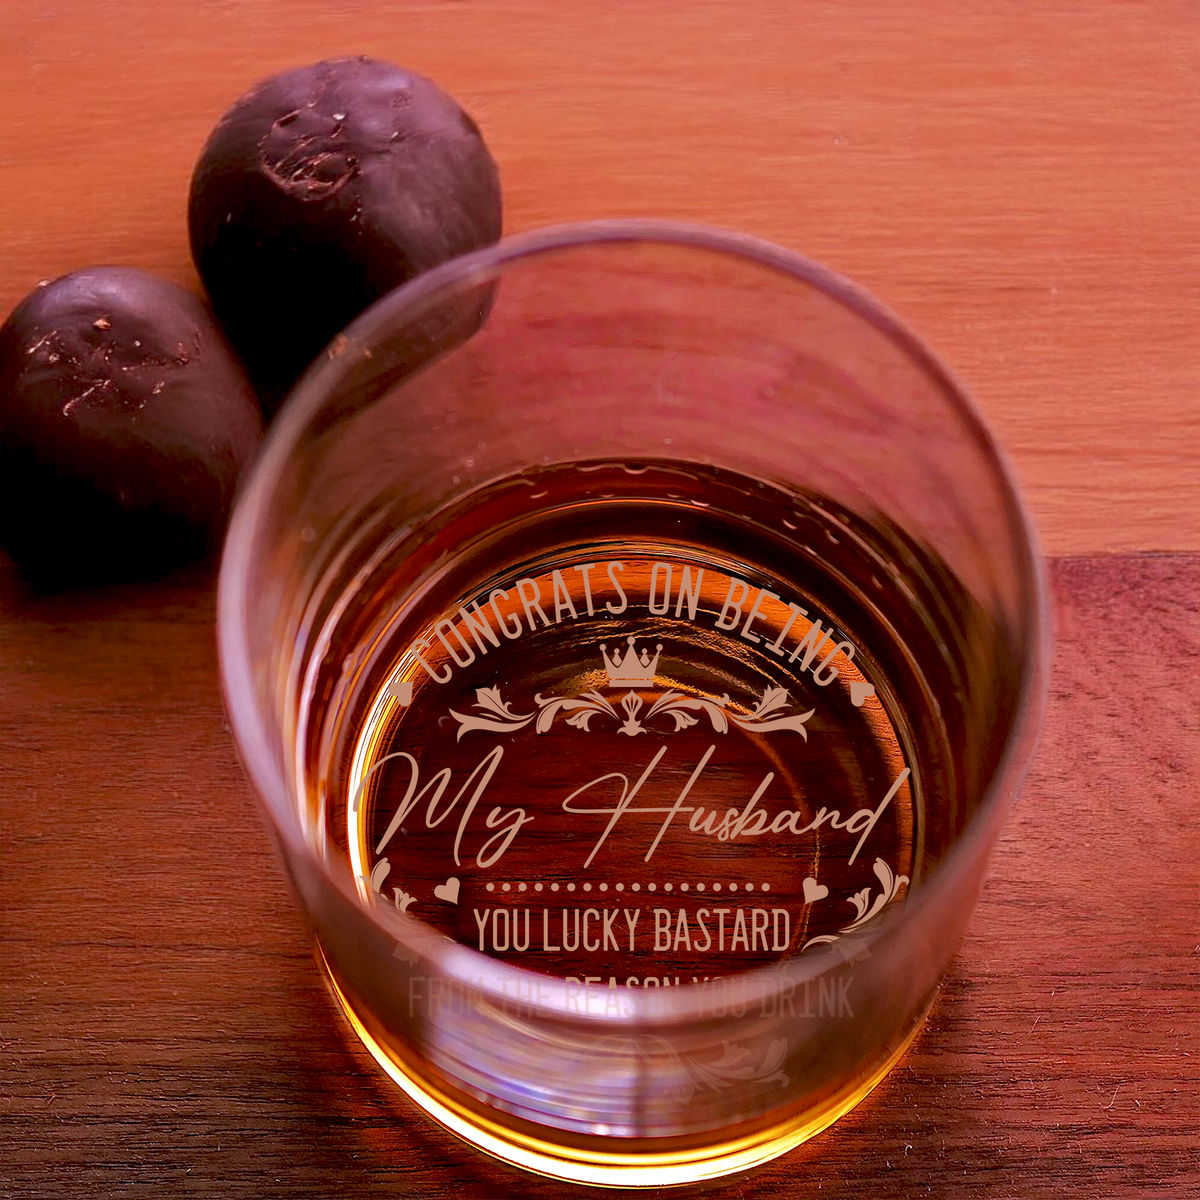 Couple Gifts - Congrats on being my Husband. You lucky bastard from the reason you  Drink. - Gifts For Dad, Husband, Boyfriend... - Gifts For Father's Day, Birthday, Anniversary - Personalize Whiskey Glass_4